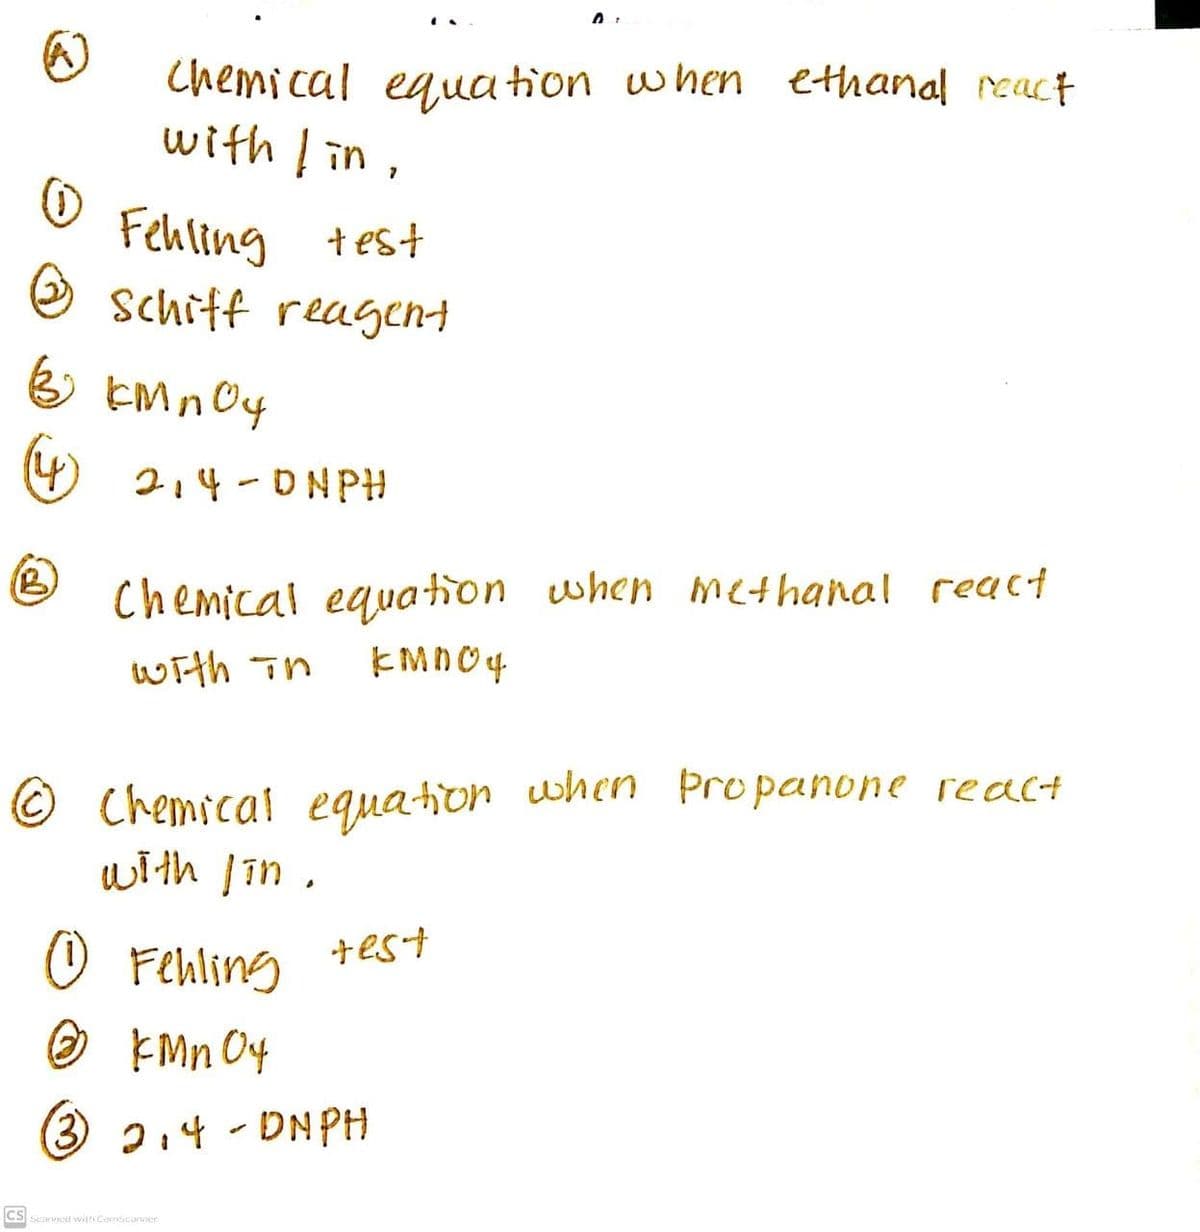 Chemical egua tion when ethanal react
with in,
Fehling test
Schiff reagent
4 214-0 NPH
Chemical equation when methanal react
with in
© Chemical equation when Propanone react
with in.
+est
O
® kMn O4
Fehling
3 214 - DNPH
CS Scarvcd with Comscanner
